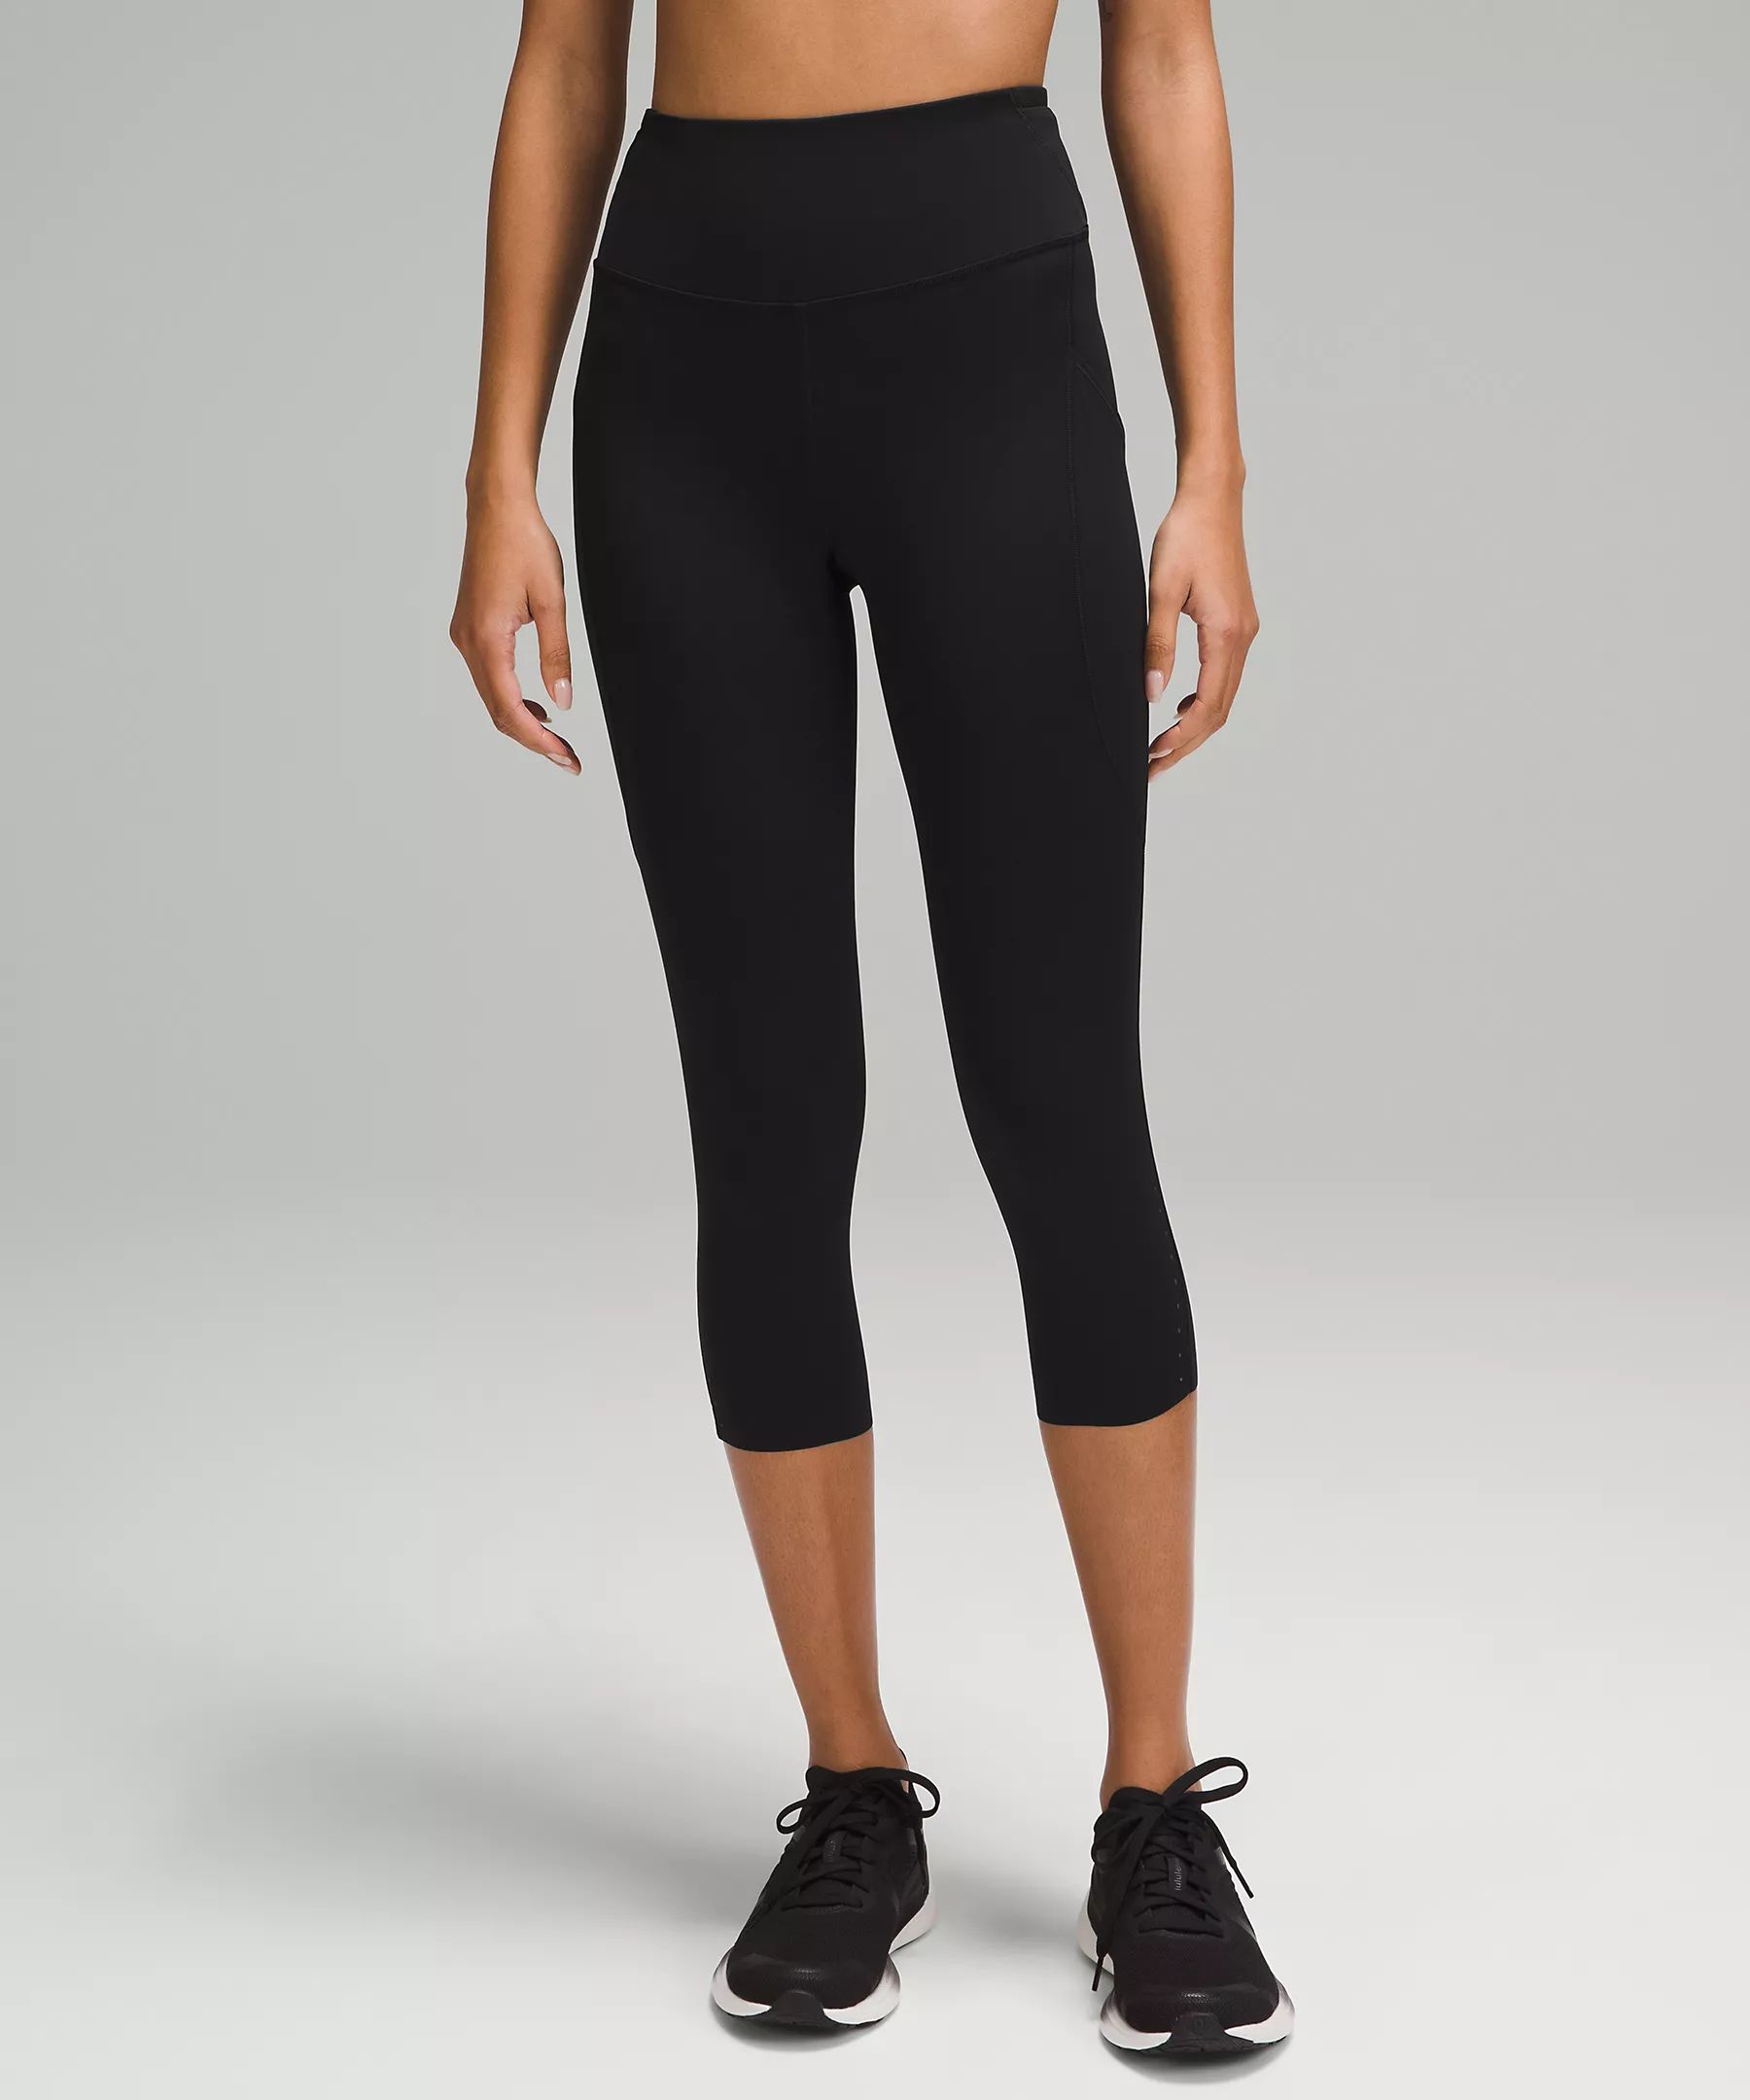 Fast and Free High-Rise Crop with Pockets 19" | Women's Capris | lululemon | Lululemon (US)